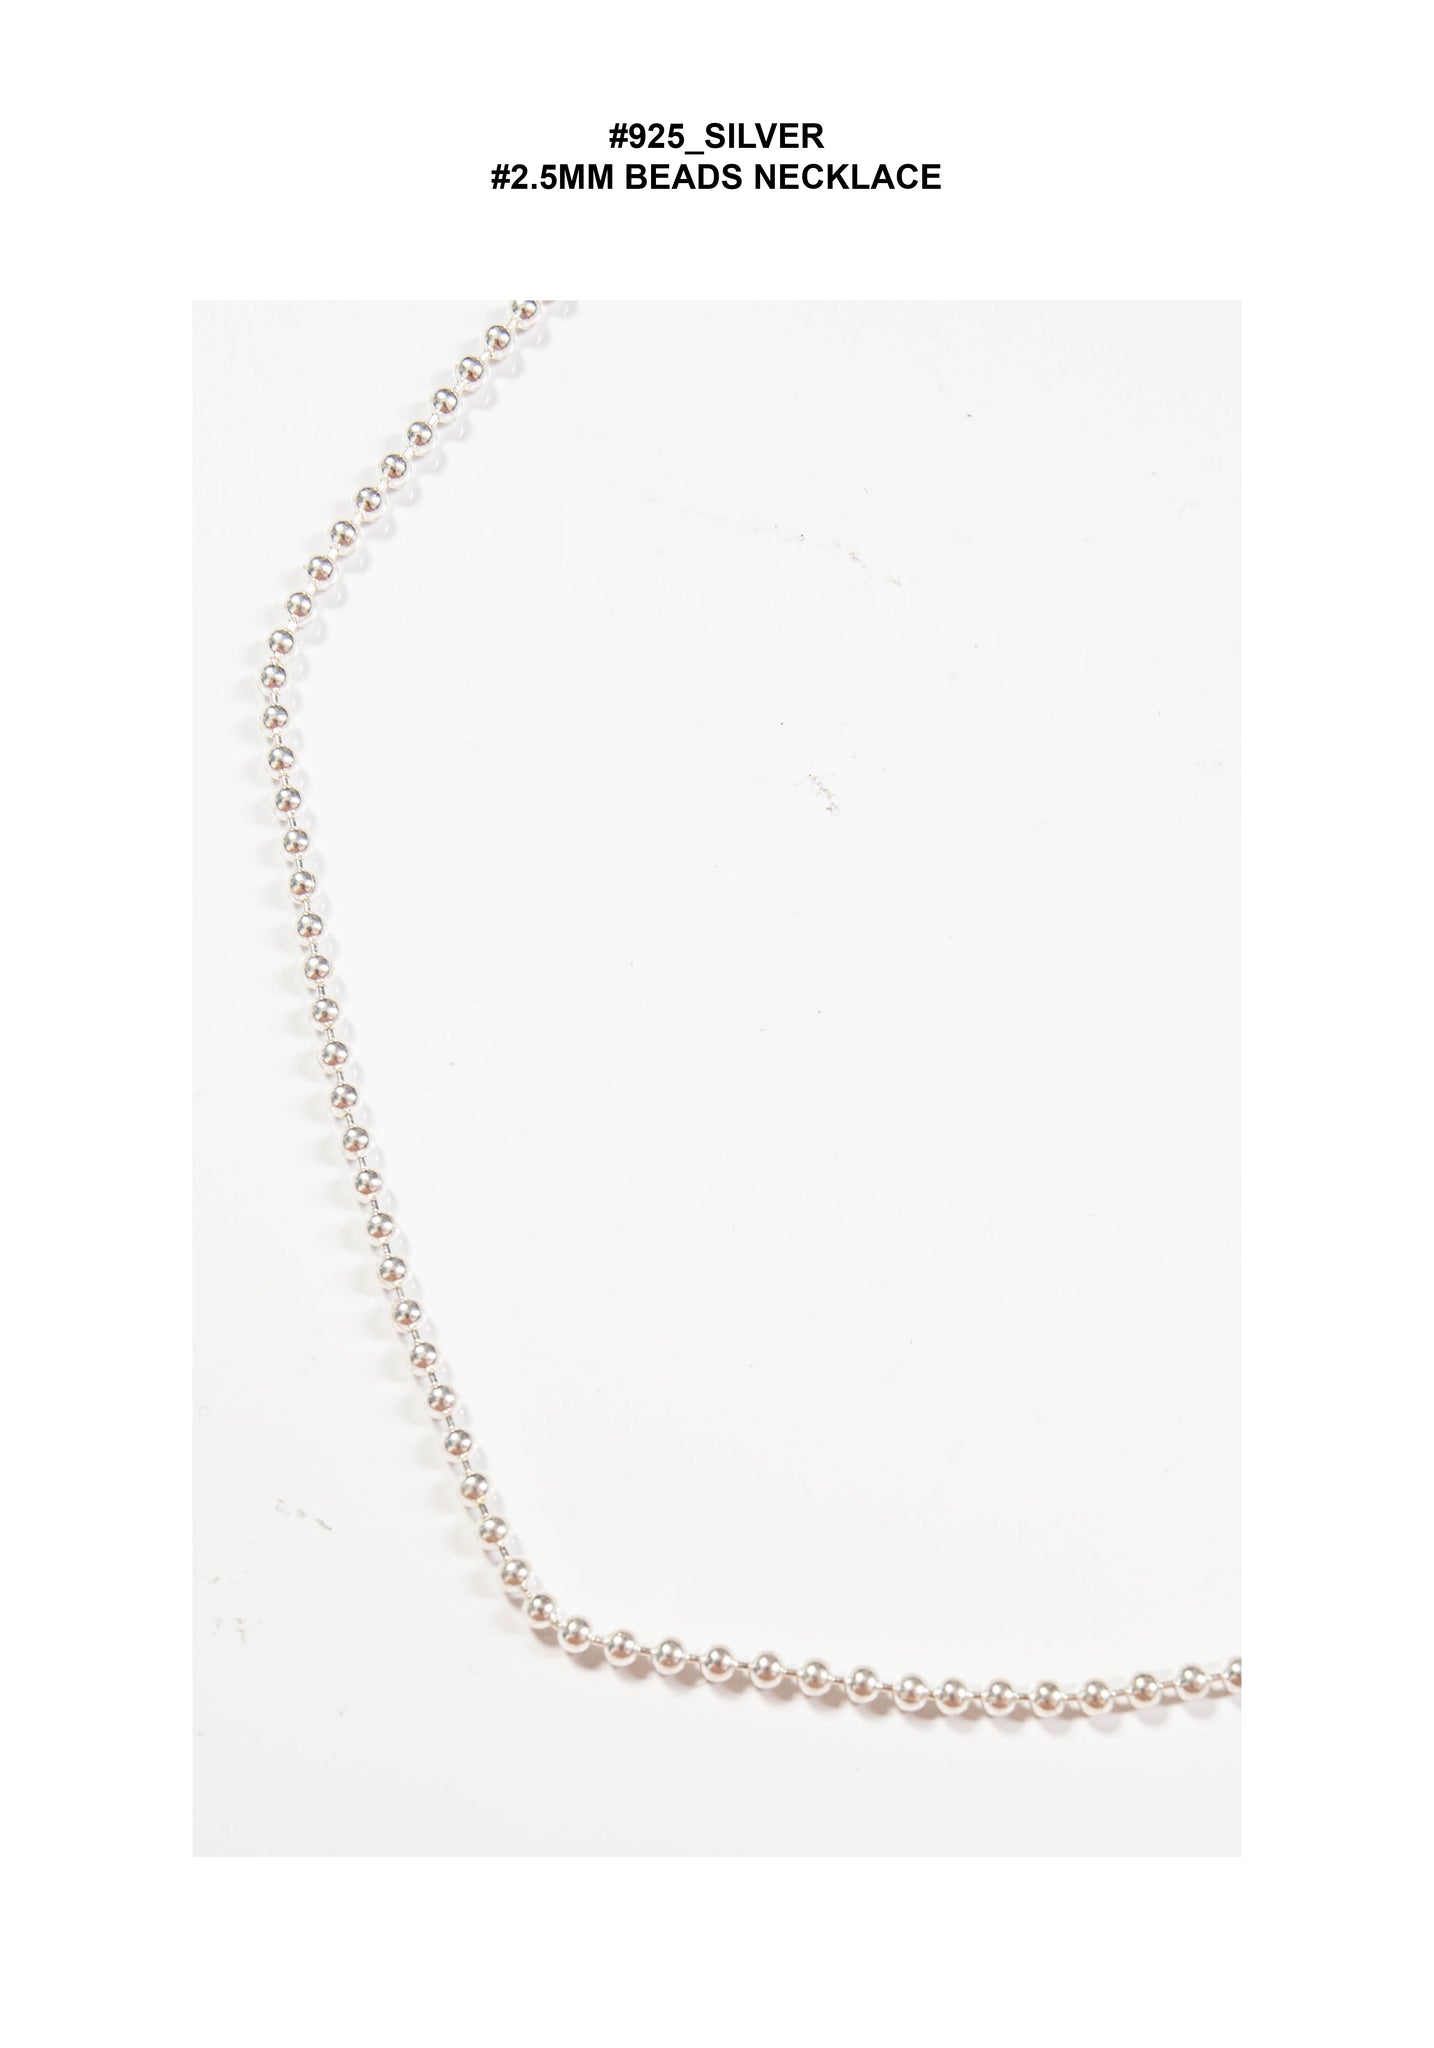 925 Silver 2.5mm Beads Necklace